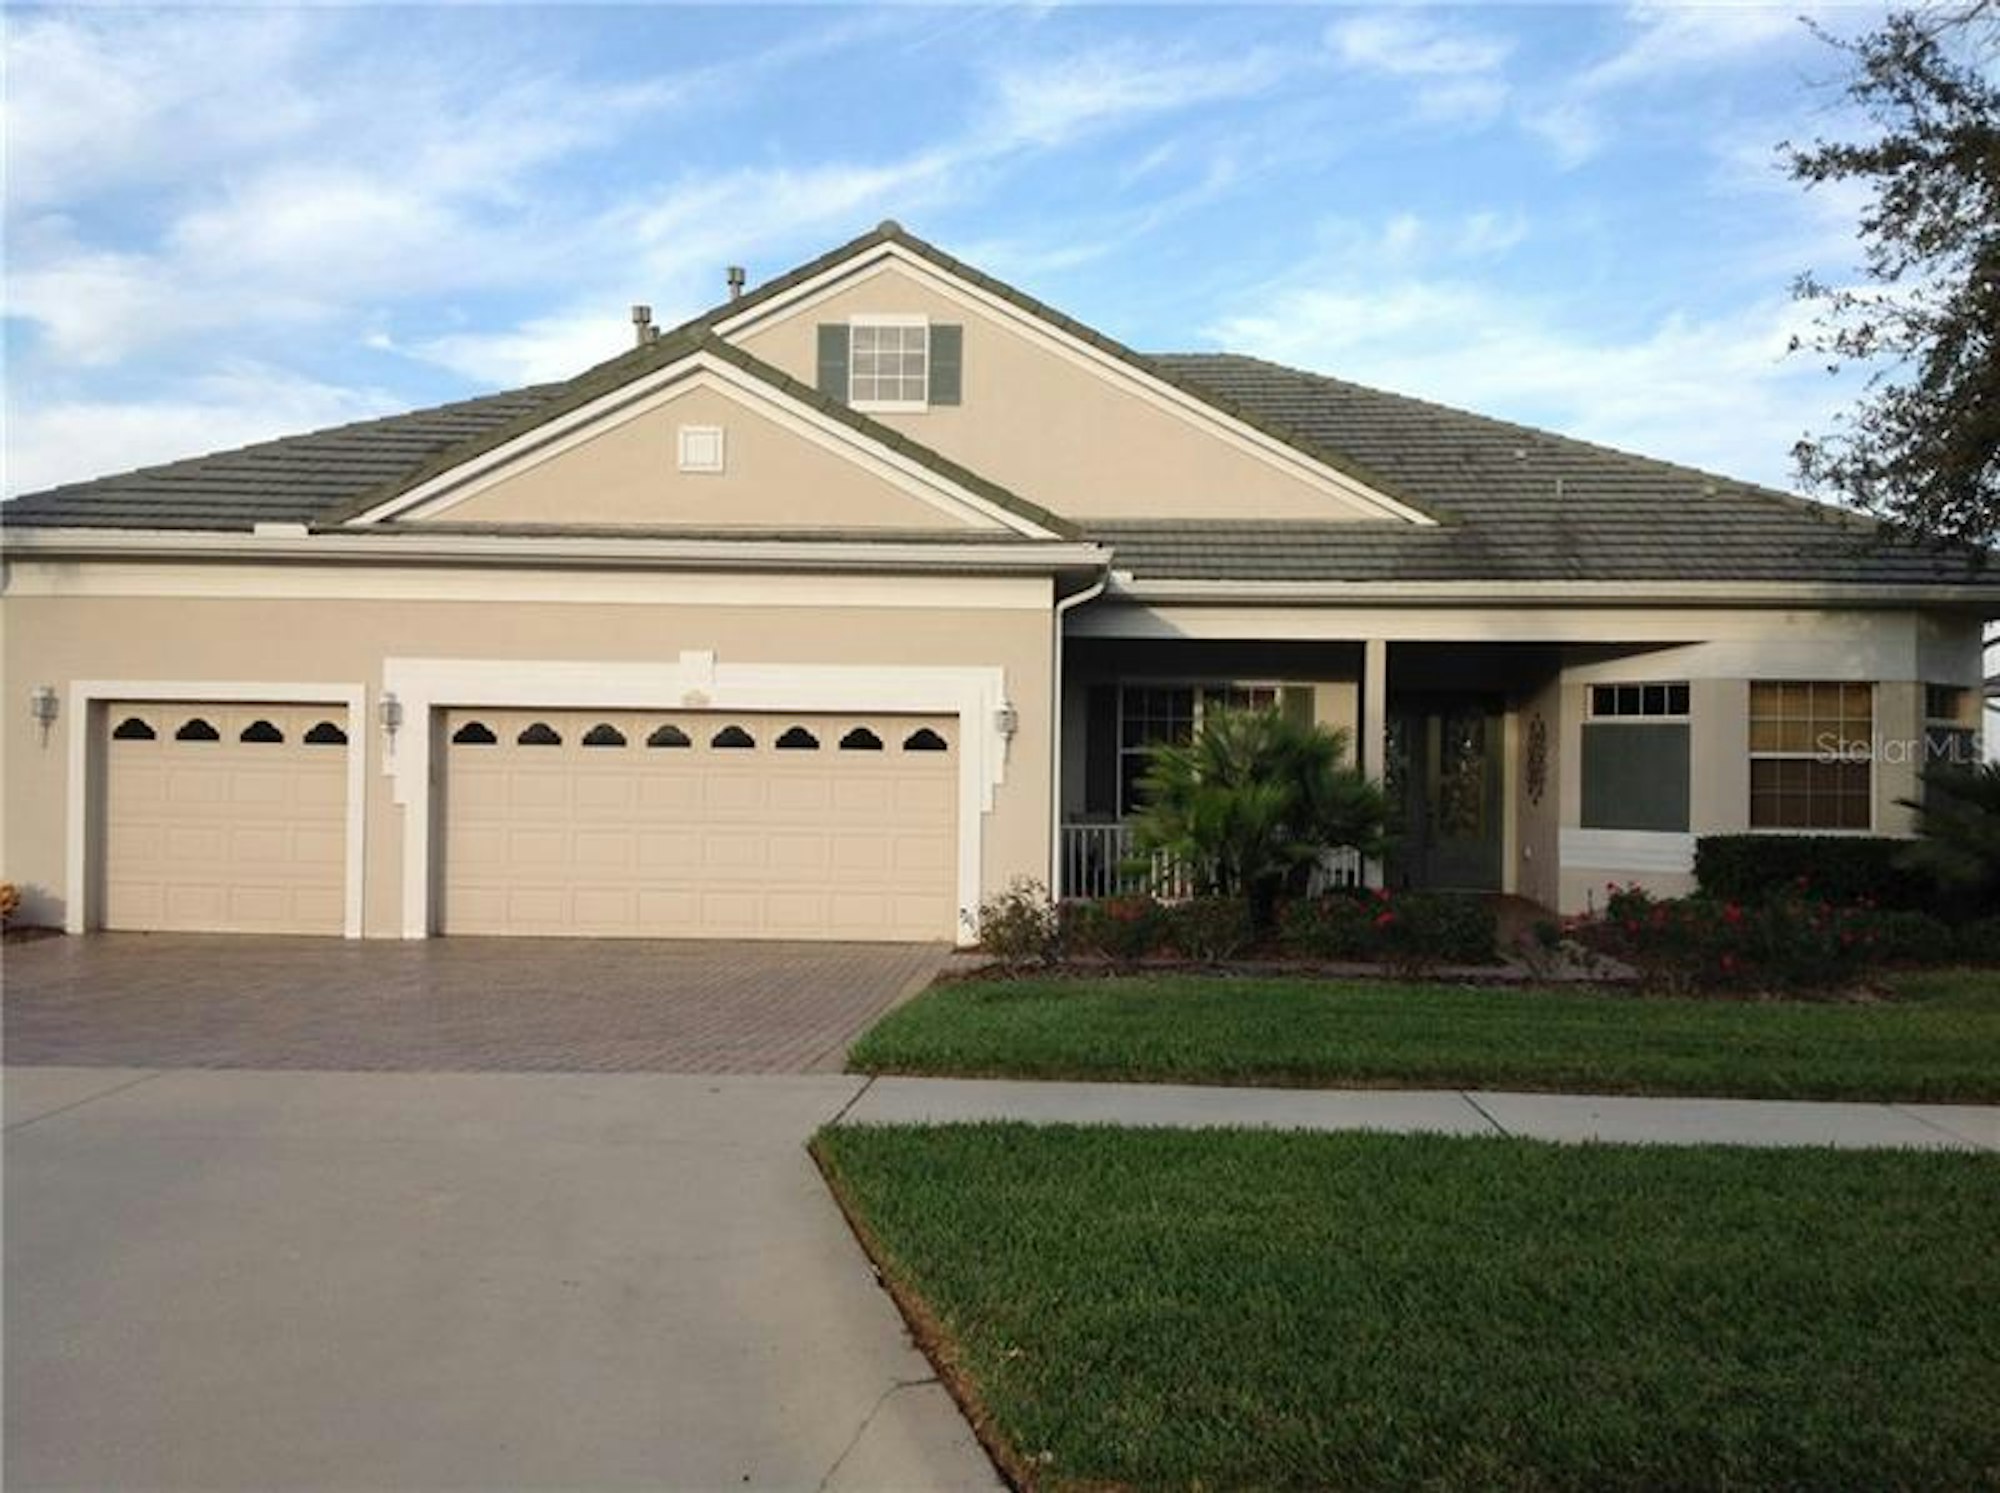 Photo 1 of 25 - 2536 Squaw Crk, Clermont, FL 34711